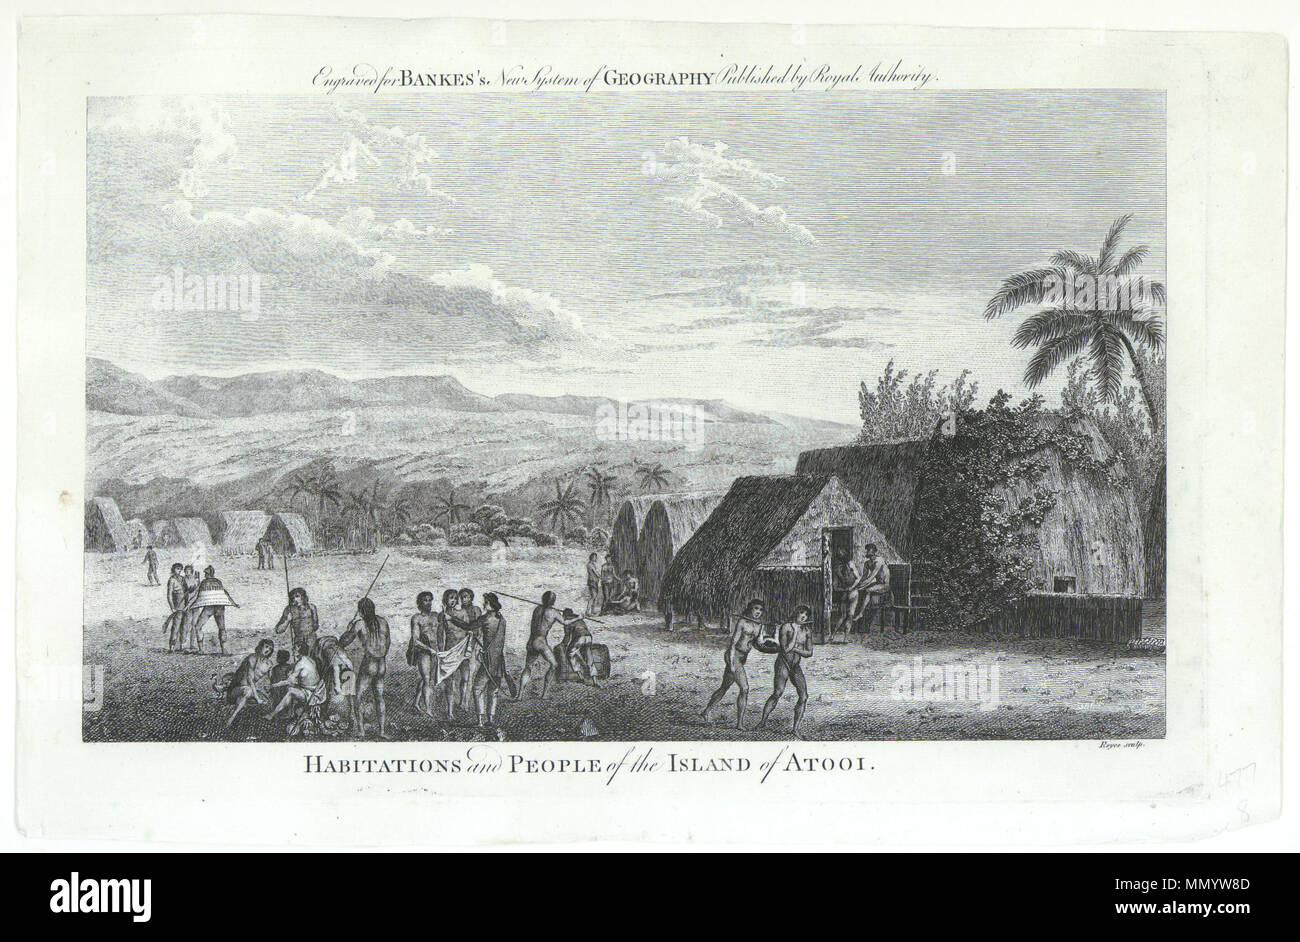 . A beautiful copper plate engraving from Reverand Thomas Bankes' New Ssystem of Geography, published in London circa 1787. Based on a John Webber drawing from Captain Cook's Third Voyage. Text above the image reads: Engraved for Bankes's New System of Geography Published by Royale Authority. Titled below image, Habitations and People of the Island of Atooi. 'Royce sculp.' in bottom right below image.  . circa 1787. Engraved by Thomas Bankes; based on a 1778 etching by  John Webber  (1751–1793)     Alternative names Johann Wãber; Johann Wäber; R.A. Webber; Weeber; Webber; R. A. Webber  Descrip Stock Photo